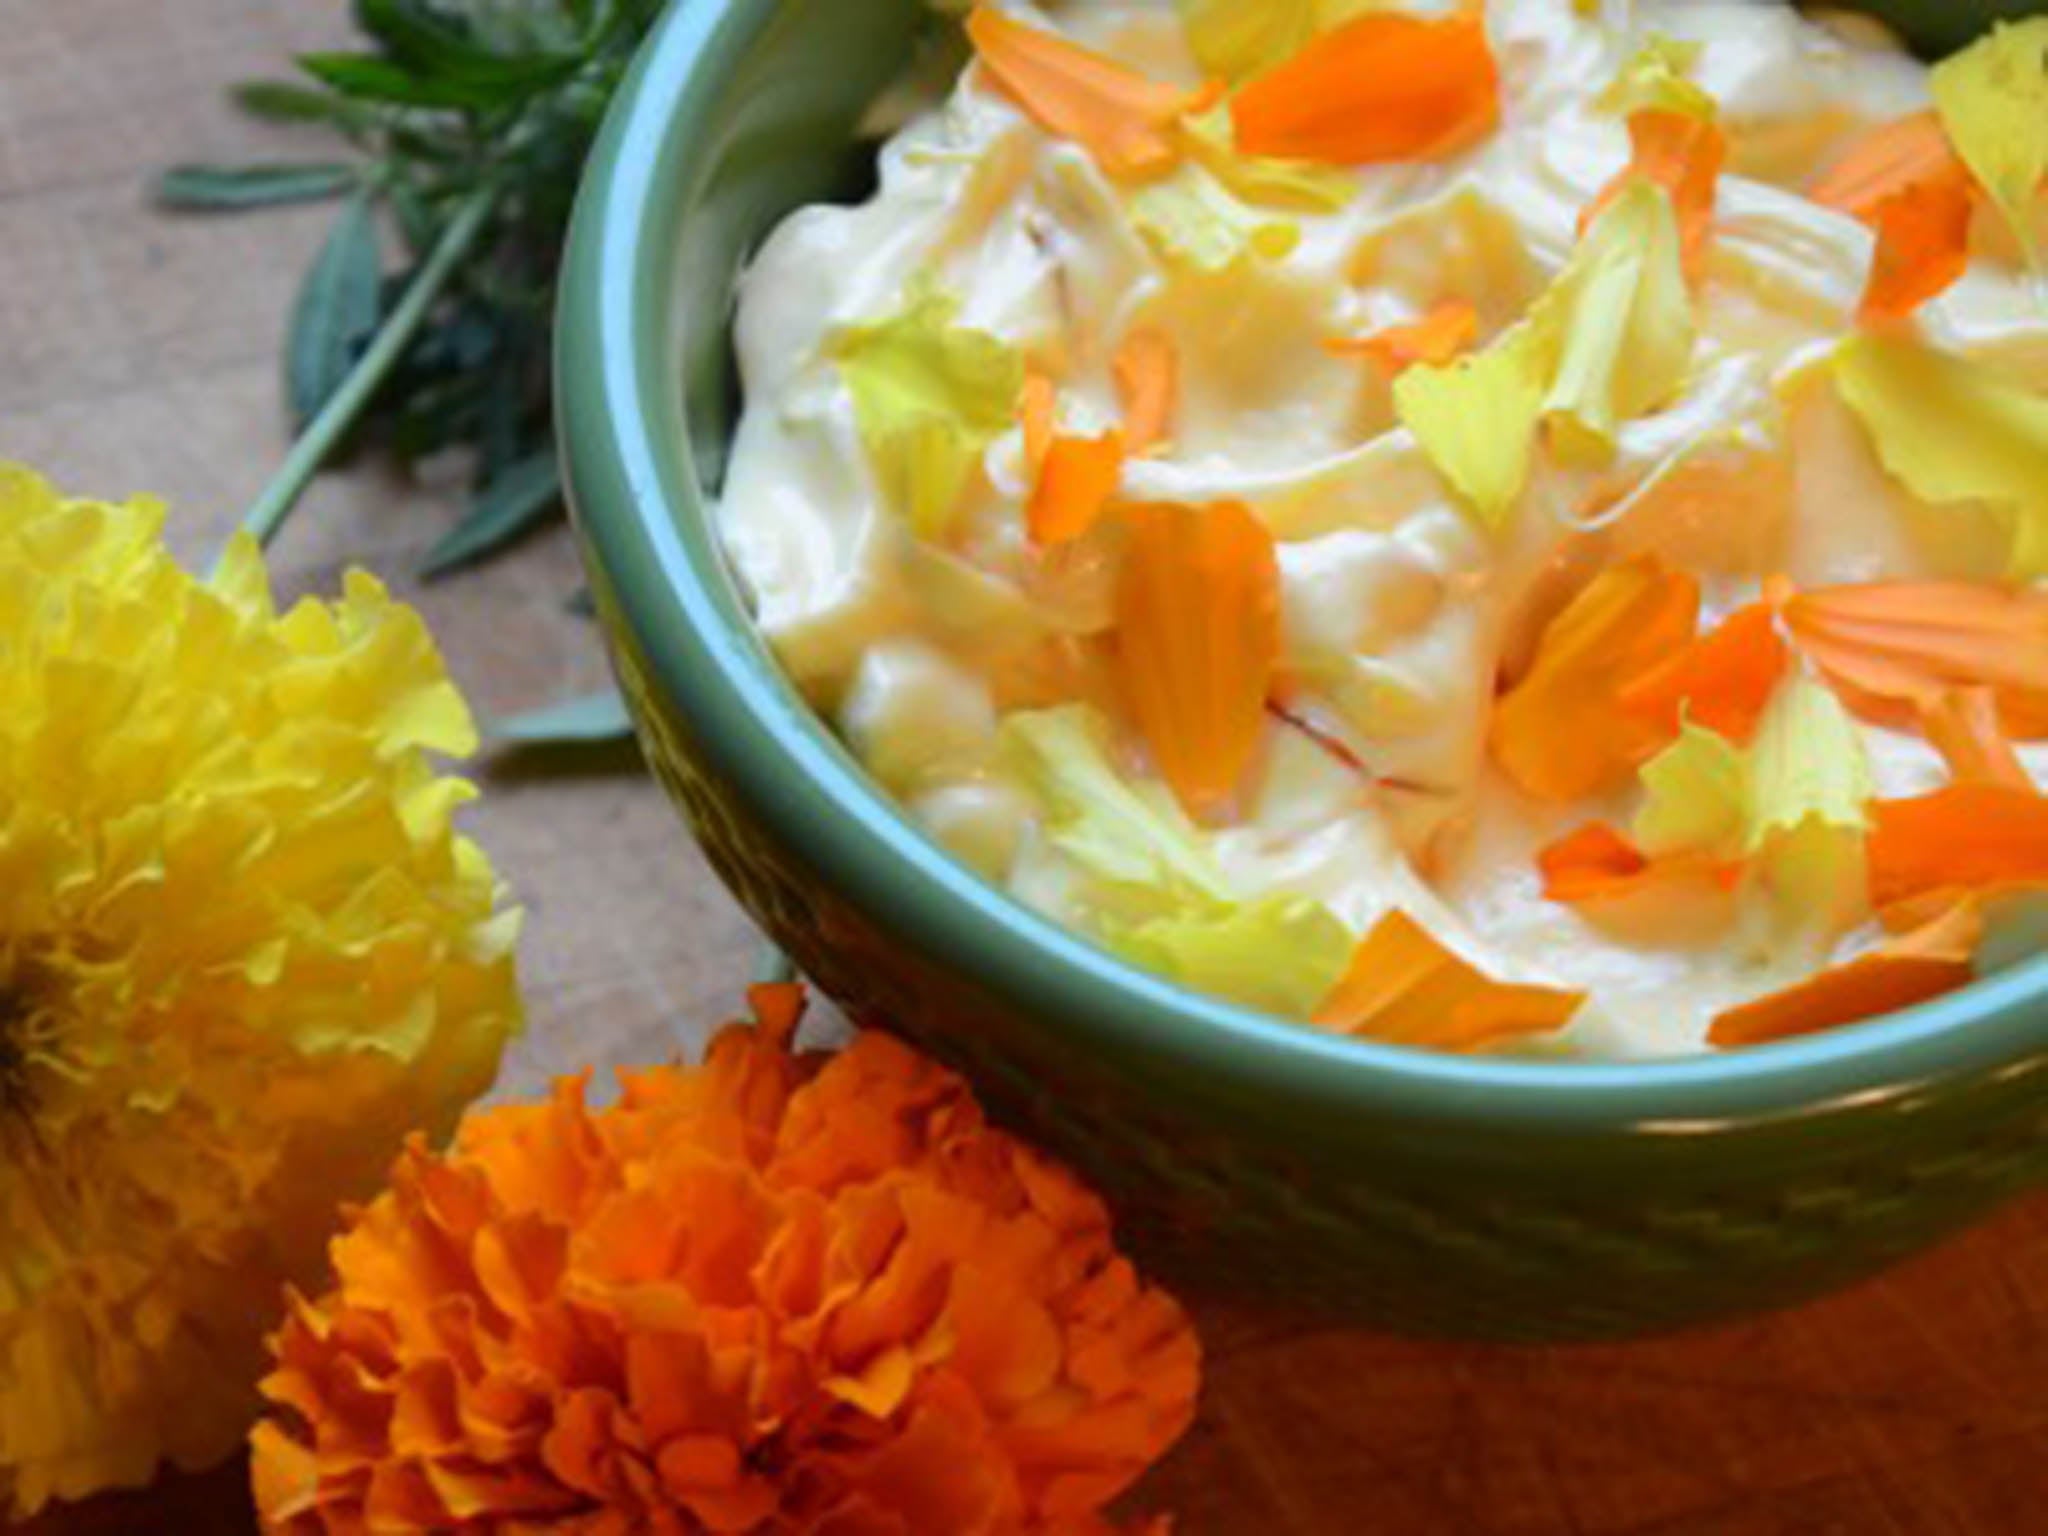 Flowers add flavour, texture and beauty to a dish. Orange marigold petals were mixed into this homemade saffron aioli